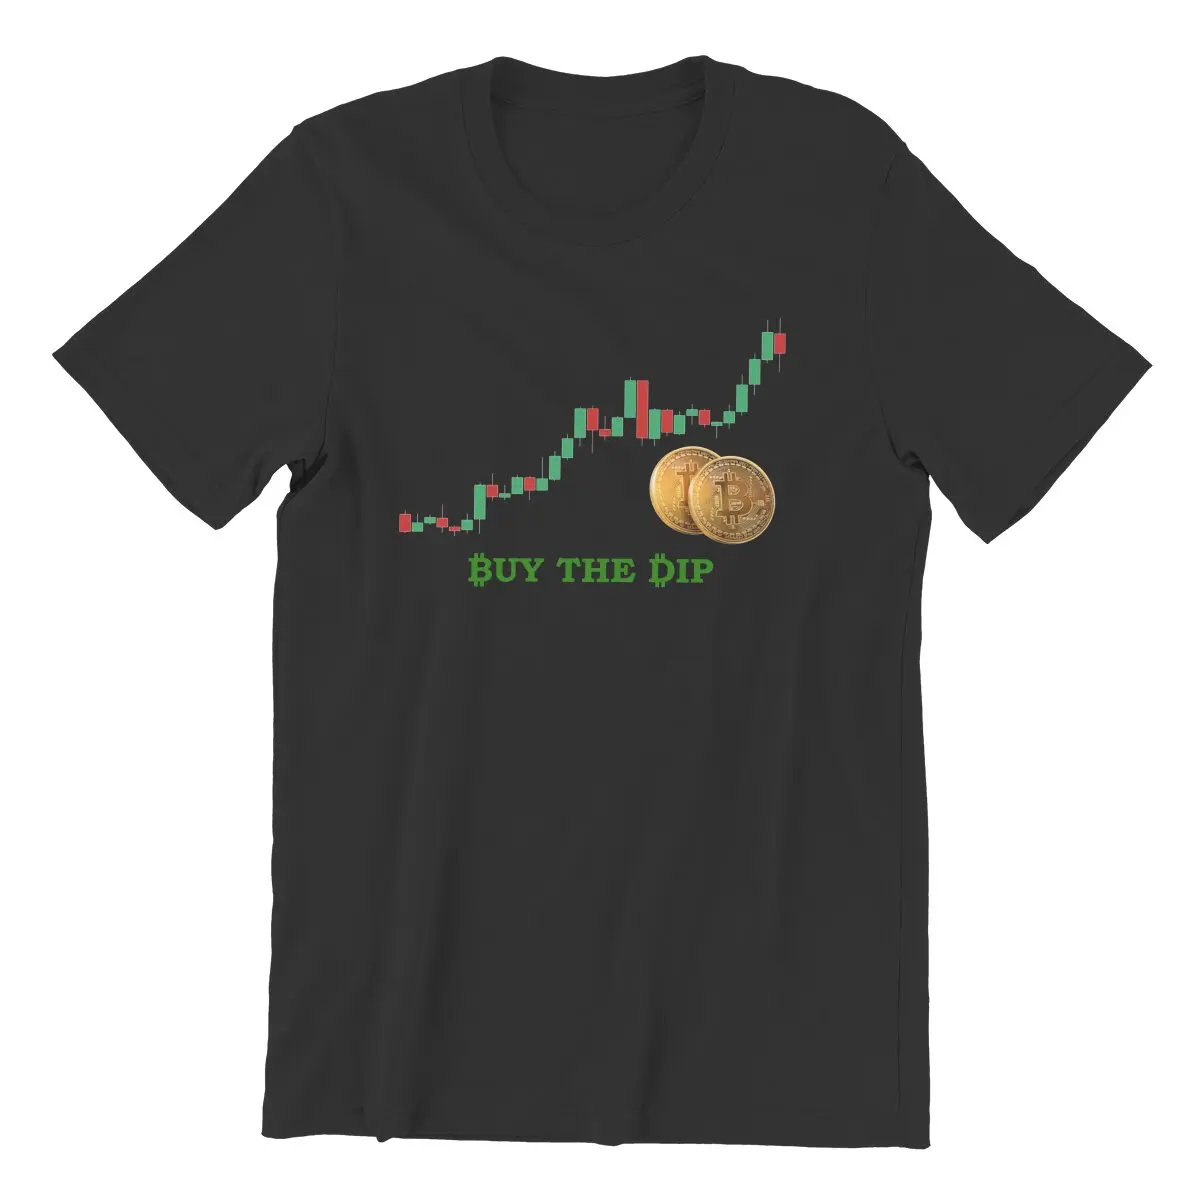 

Buy The Dip T Shirt Men Pure Cotton Novelty T-Shirt Crew Neck Cryptocurrency Forex Stock Market Tees Short Sleeve Tops Graphic